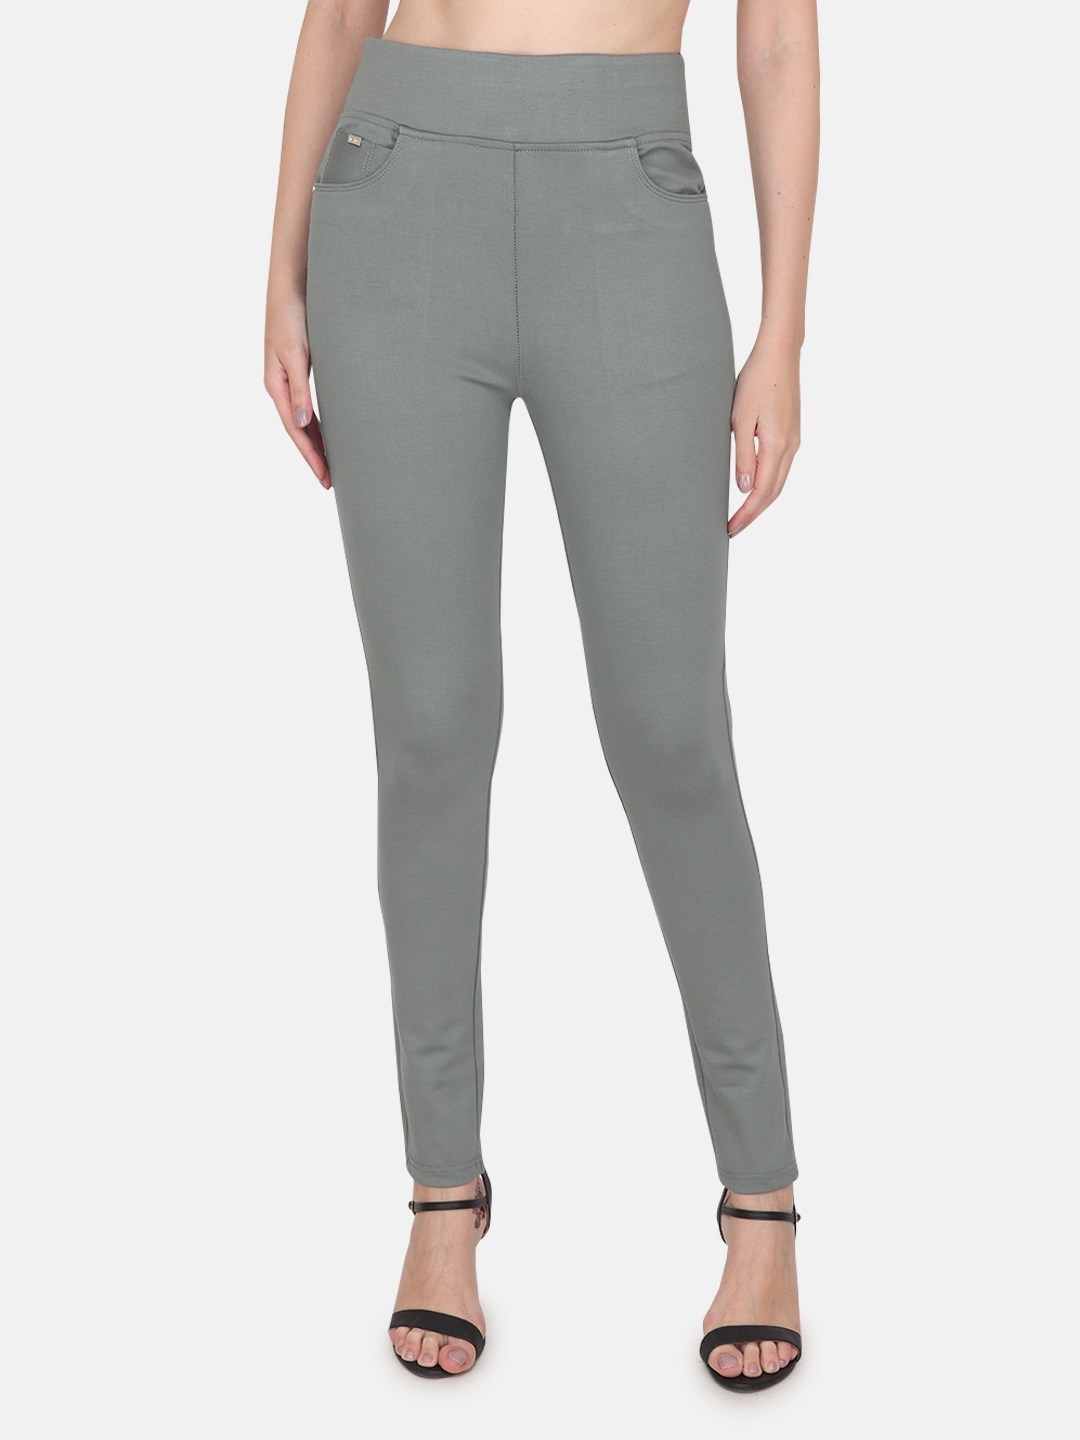 Albion By CnM Mint Women's Jeggings